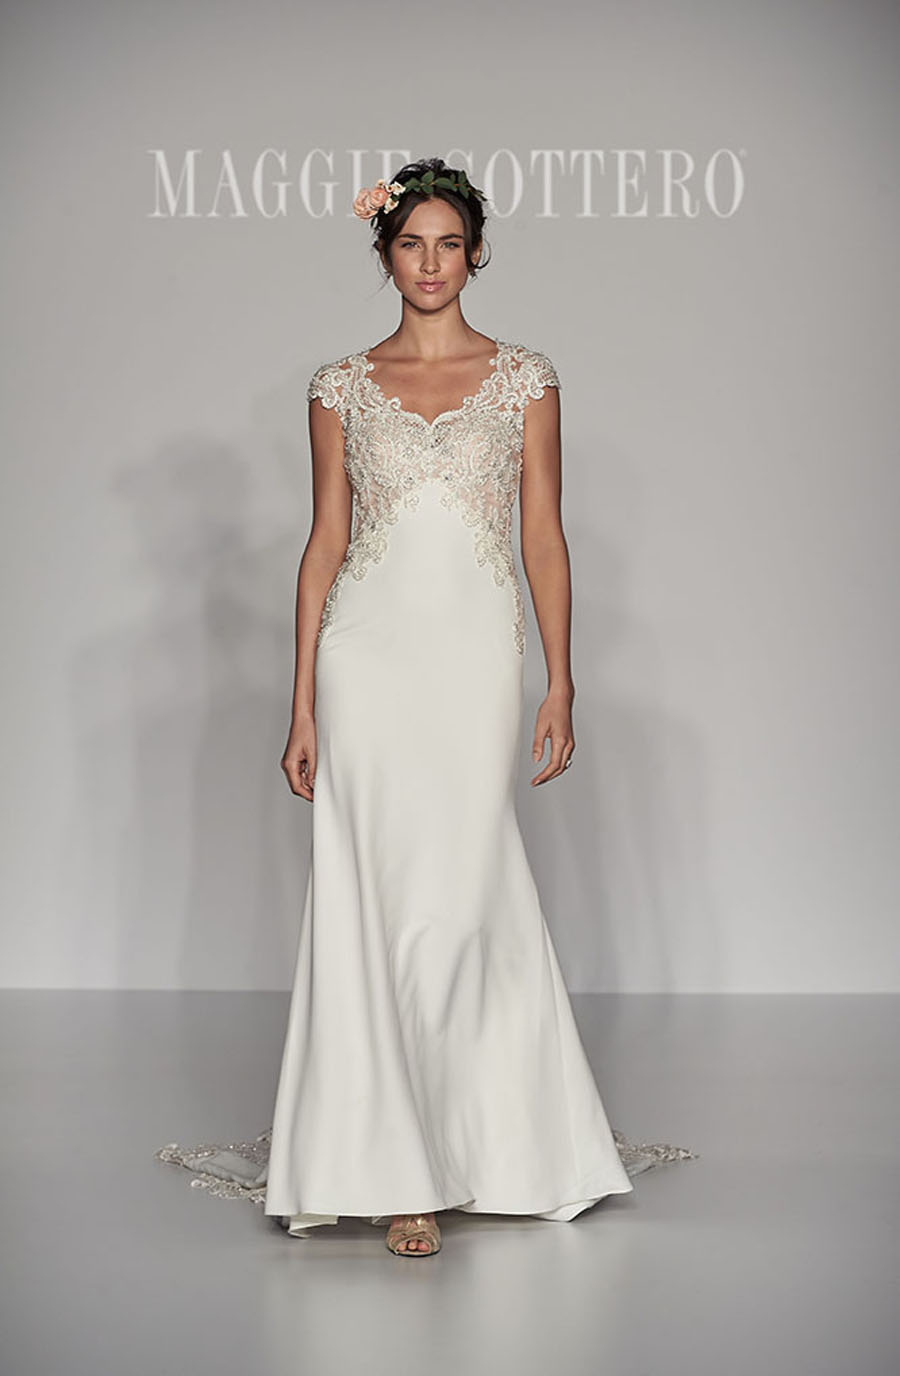 Maggie Sottero Spring 2017 Collection - Odetter front